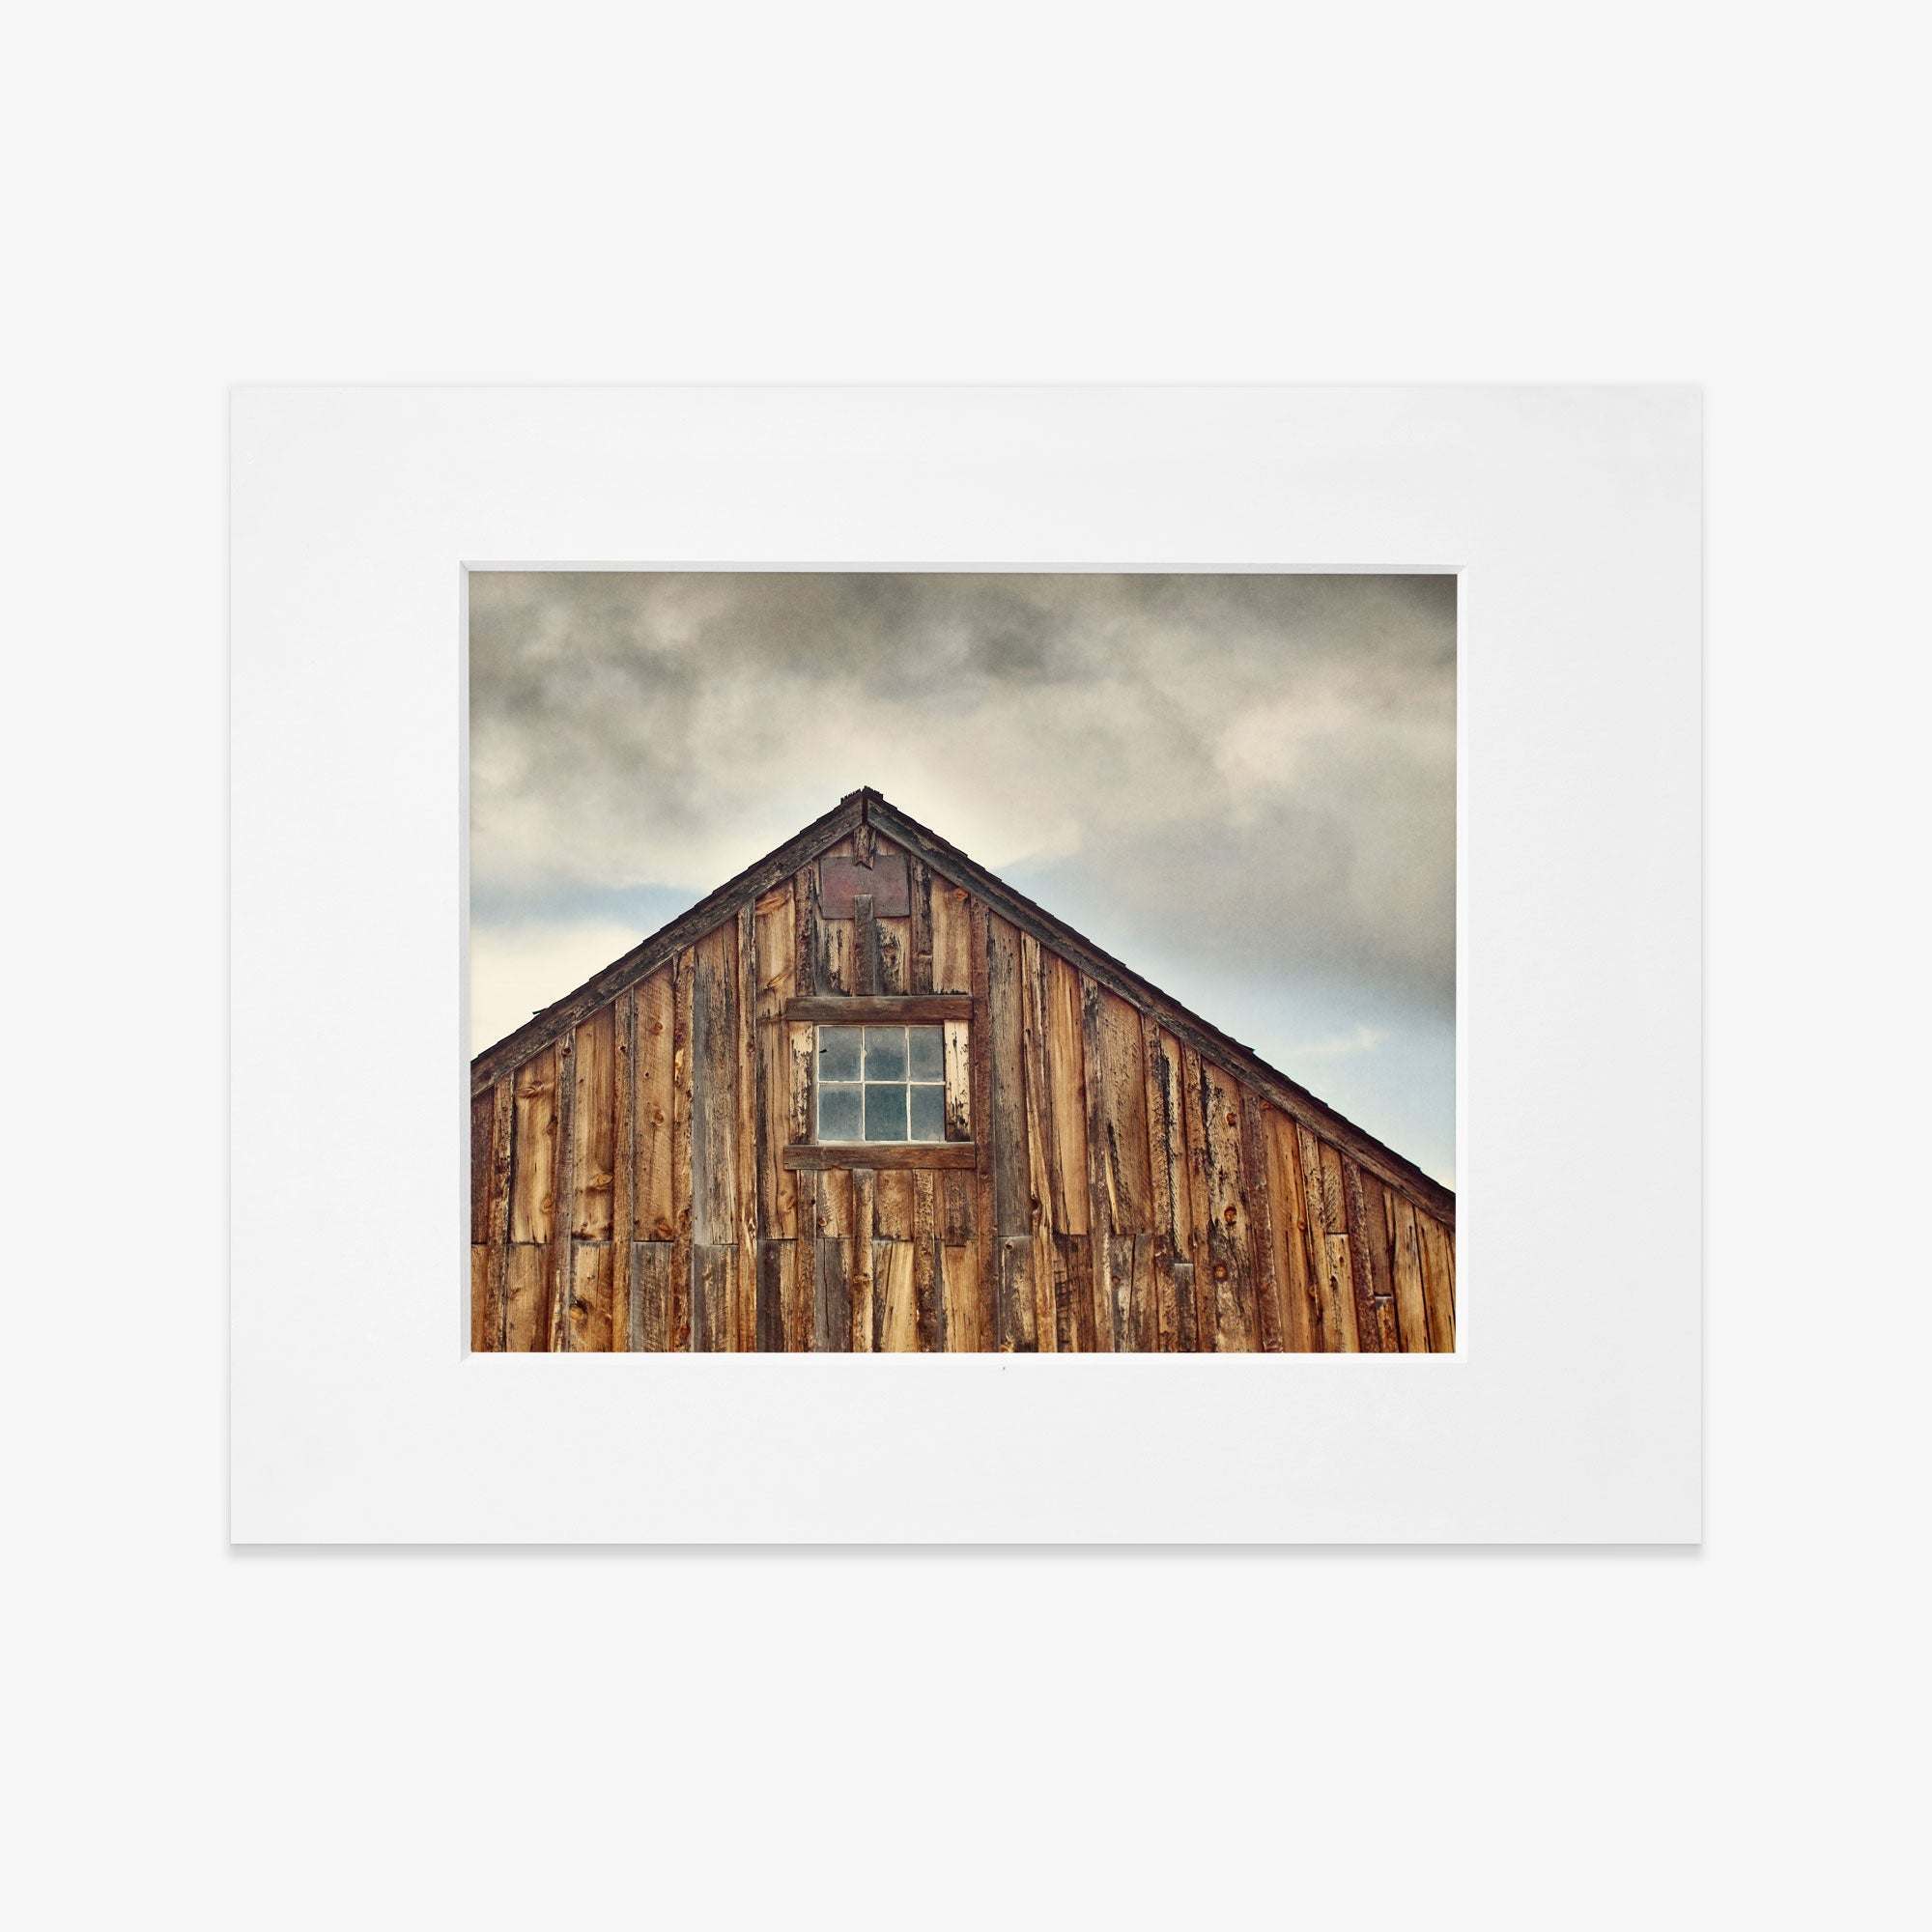 Framed photograph of a Farmhouse Rustic Print, &#39;Old Barn at Bodie&#39; by Offley Green, set against a cloudy sky, printed on archival photographic paper.